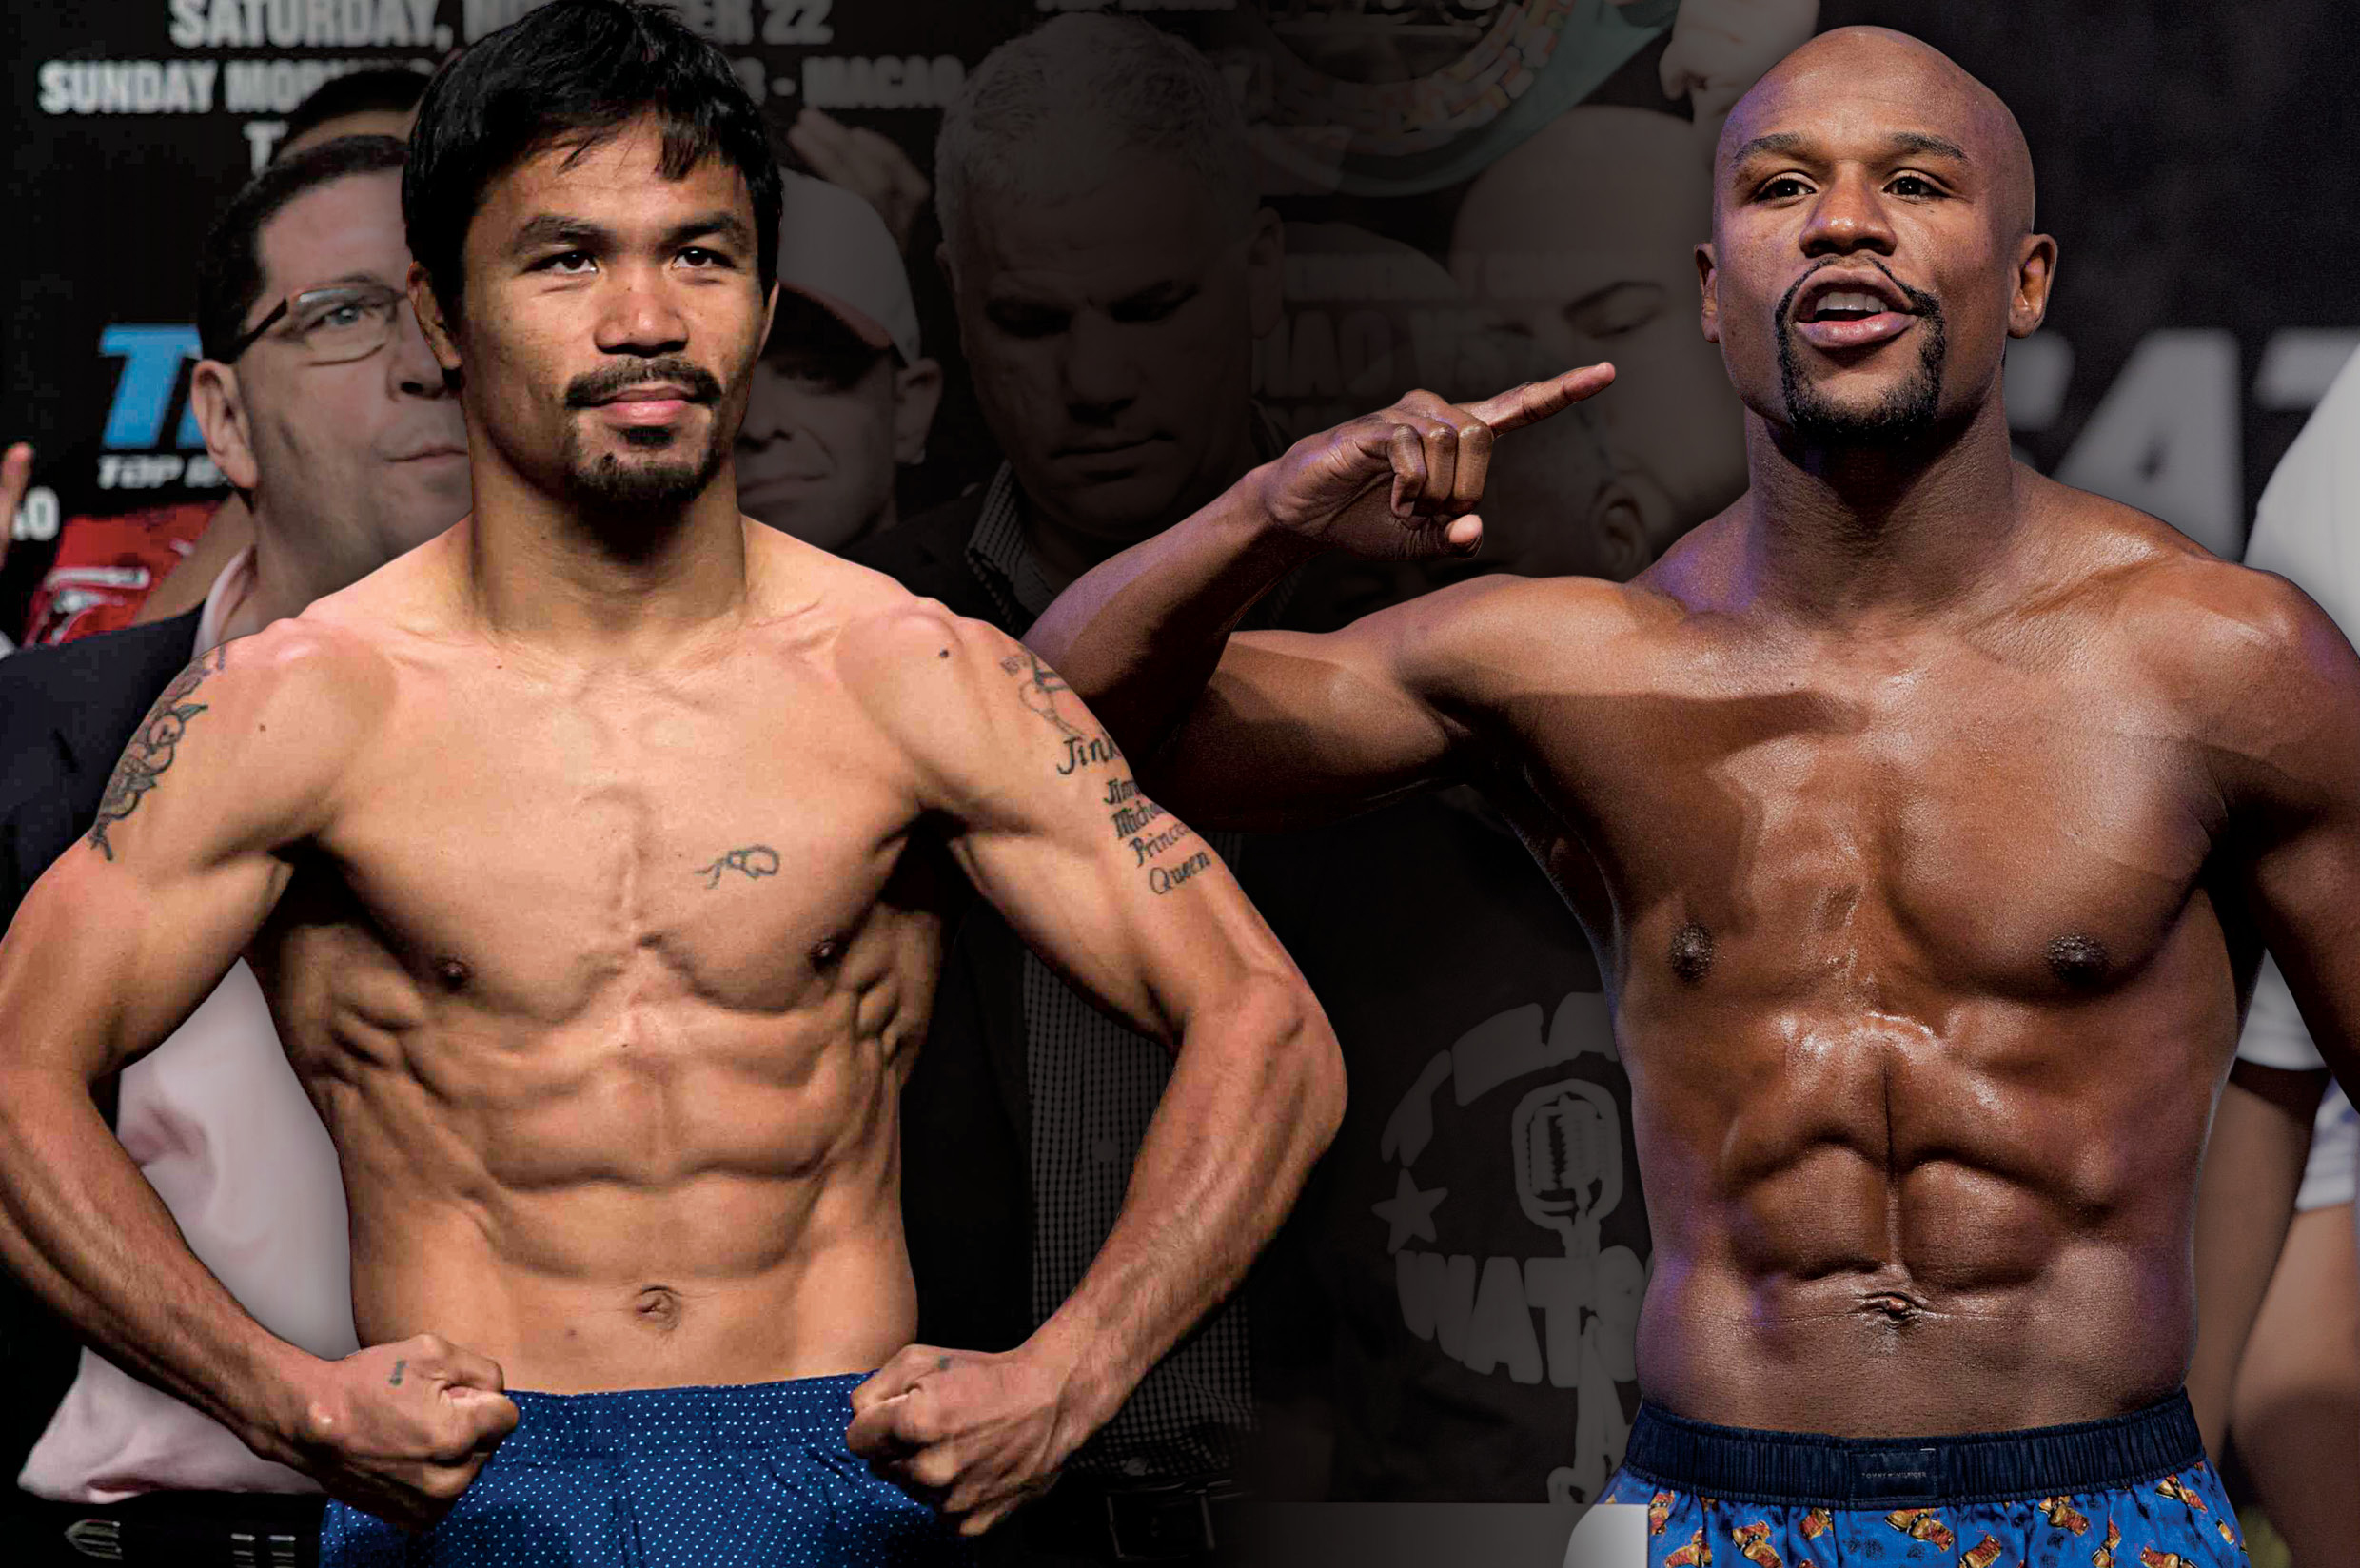 Mayweather and Pacquiao promise to deliver on hype